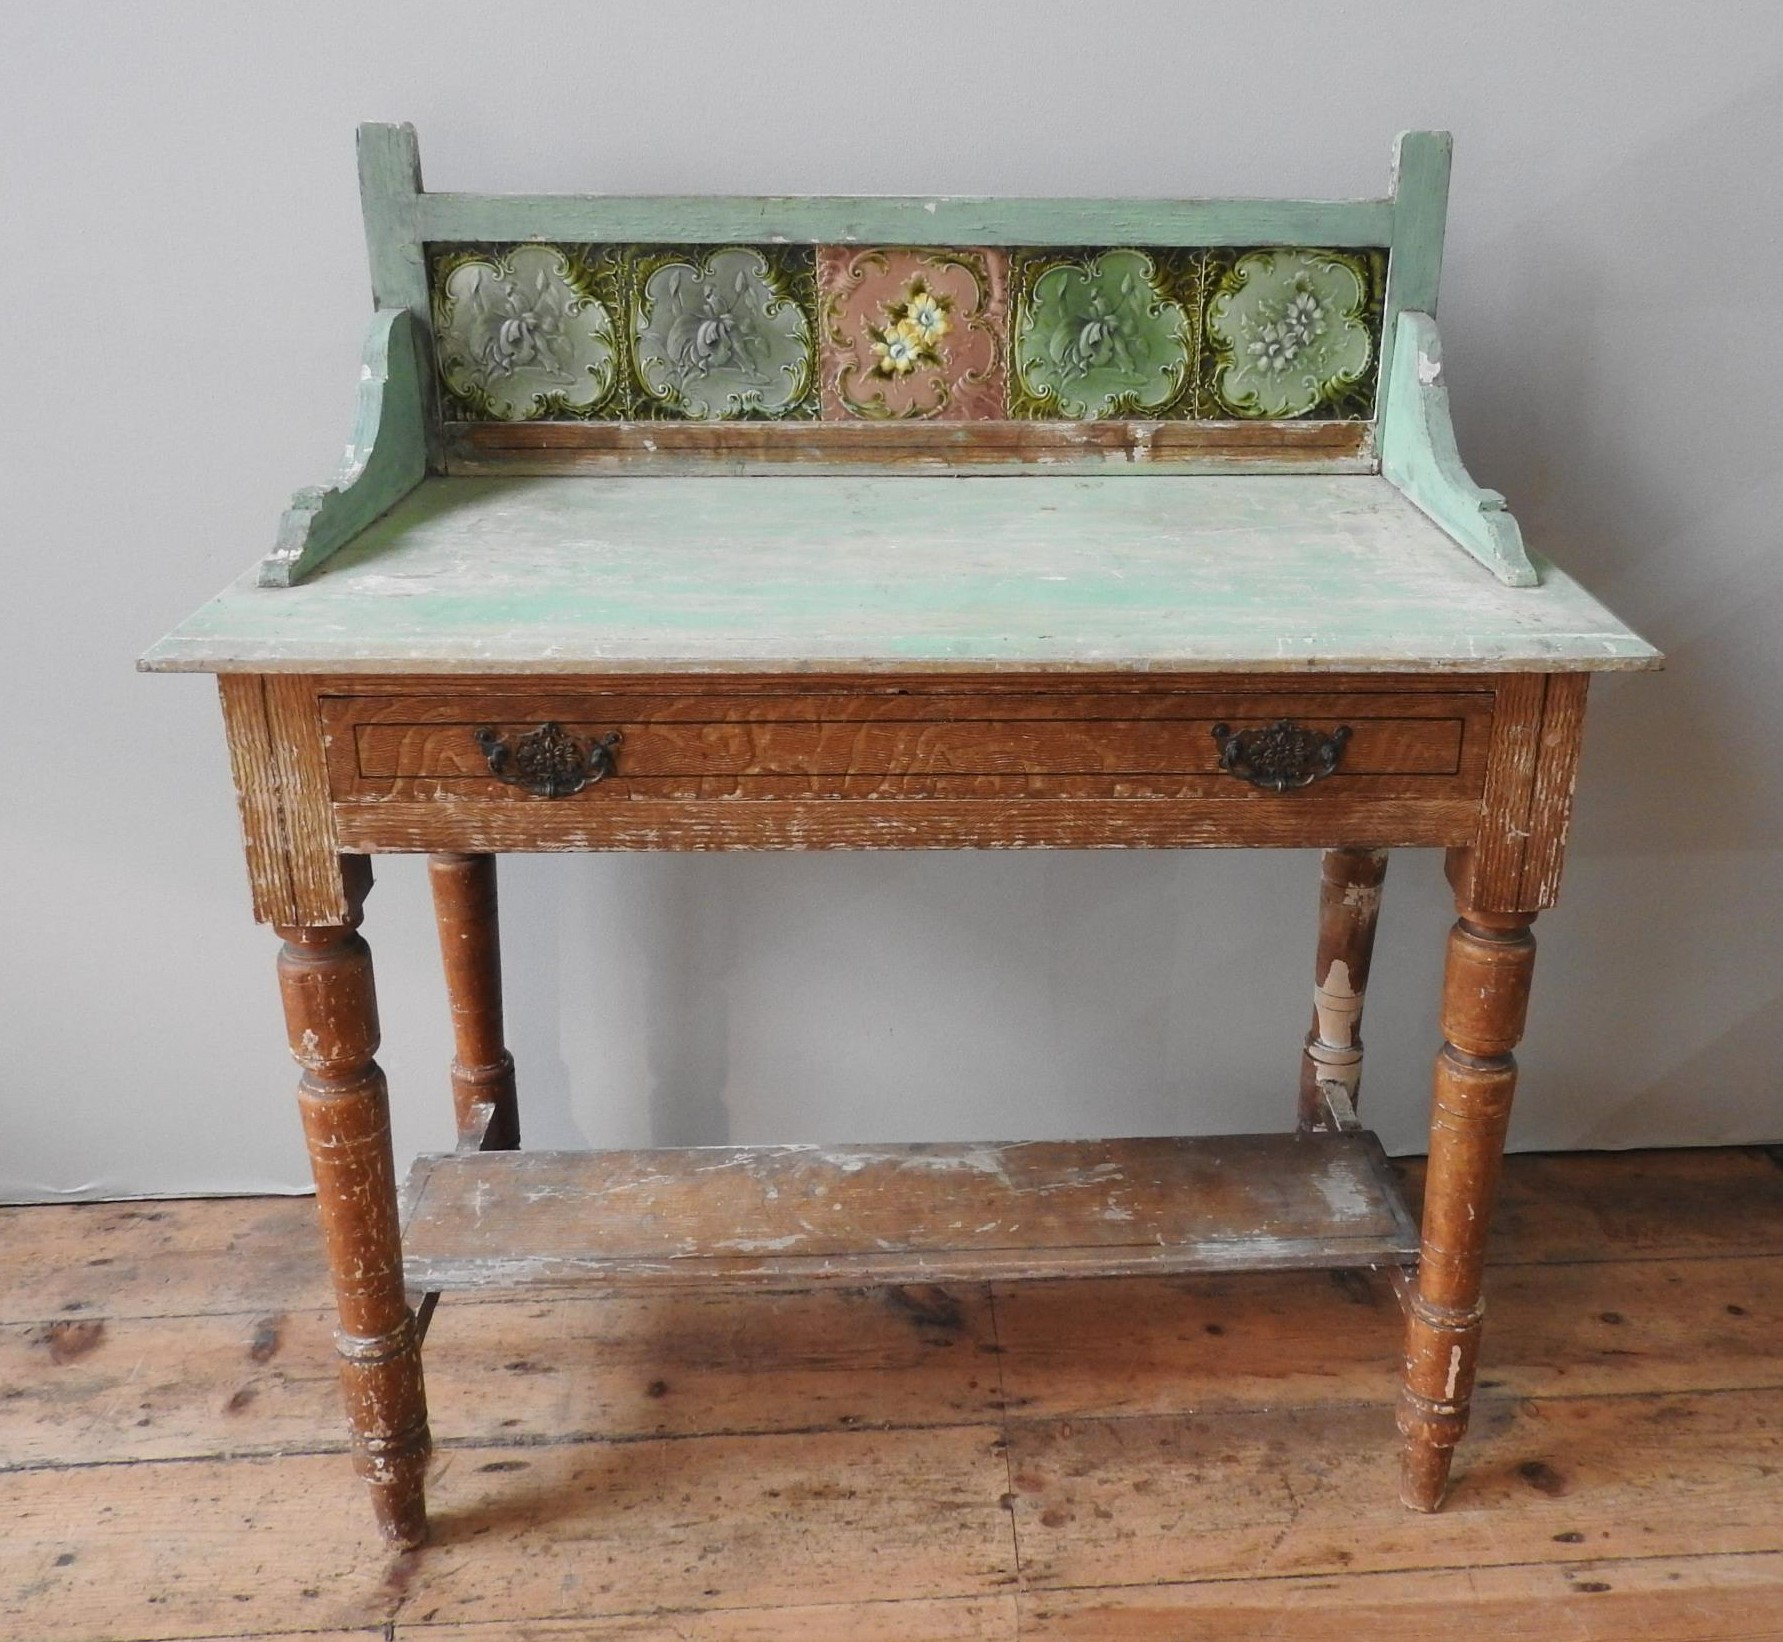 A 19th CENTURY PINE GRAIN PAINTED TILE BACK WASH STAND, 100 x 91 x 46 cm - Image 6 of 6